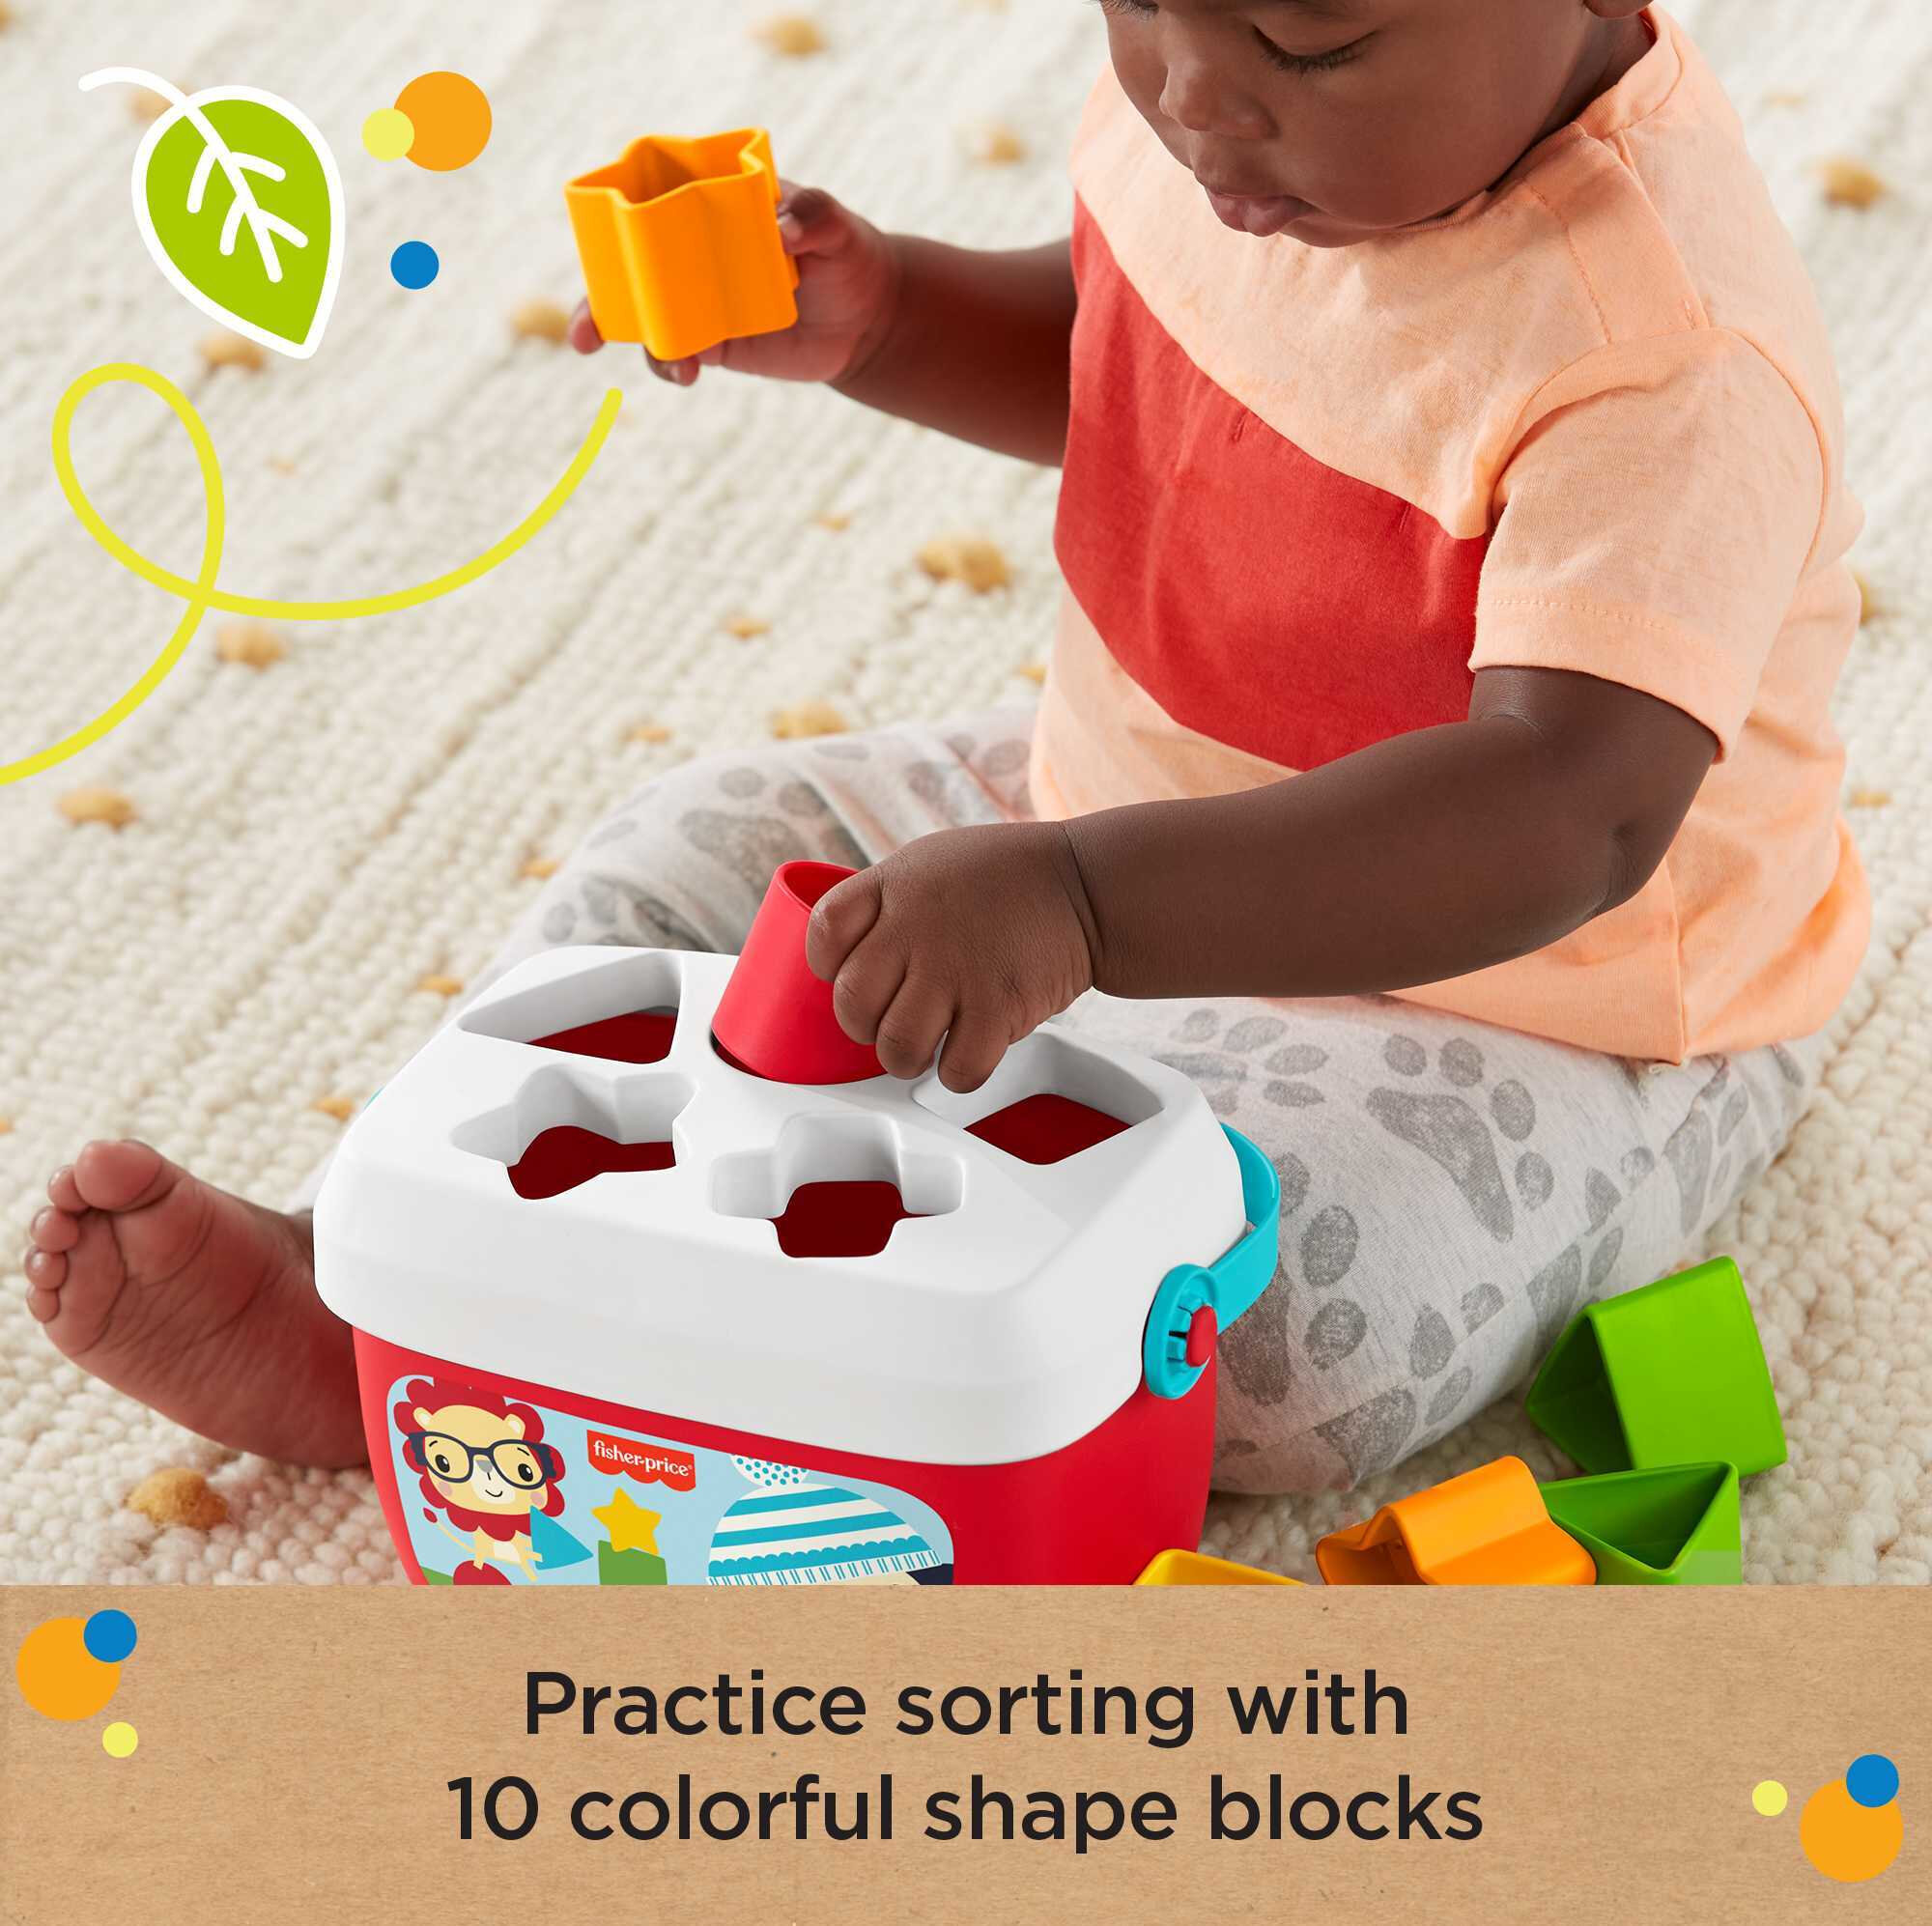 Fisher-Price Baby’s First Blocks & Rock-a-Stack Infant Toy Gift Set Made From Plant-Based Materials - image 3 of 6